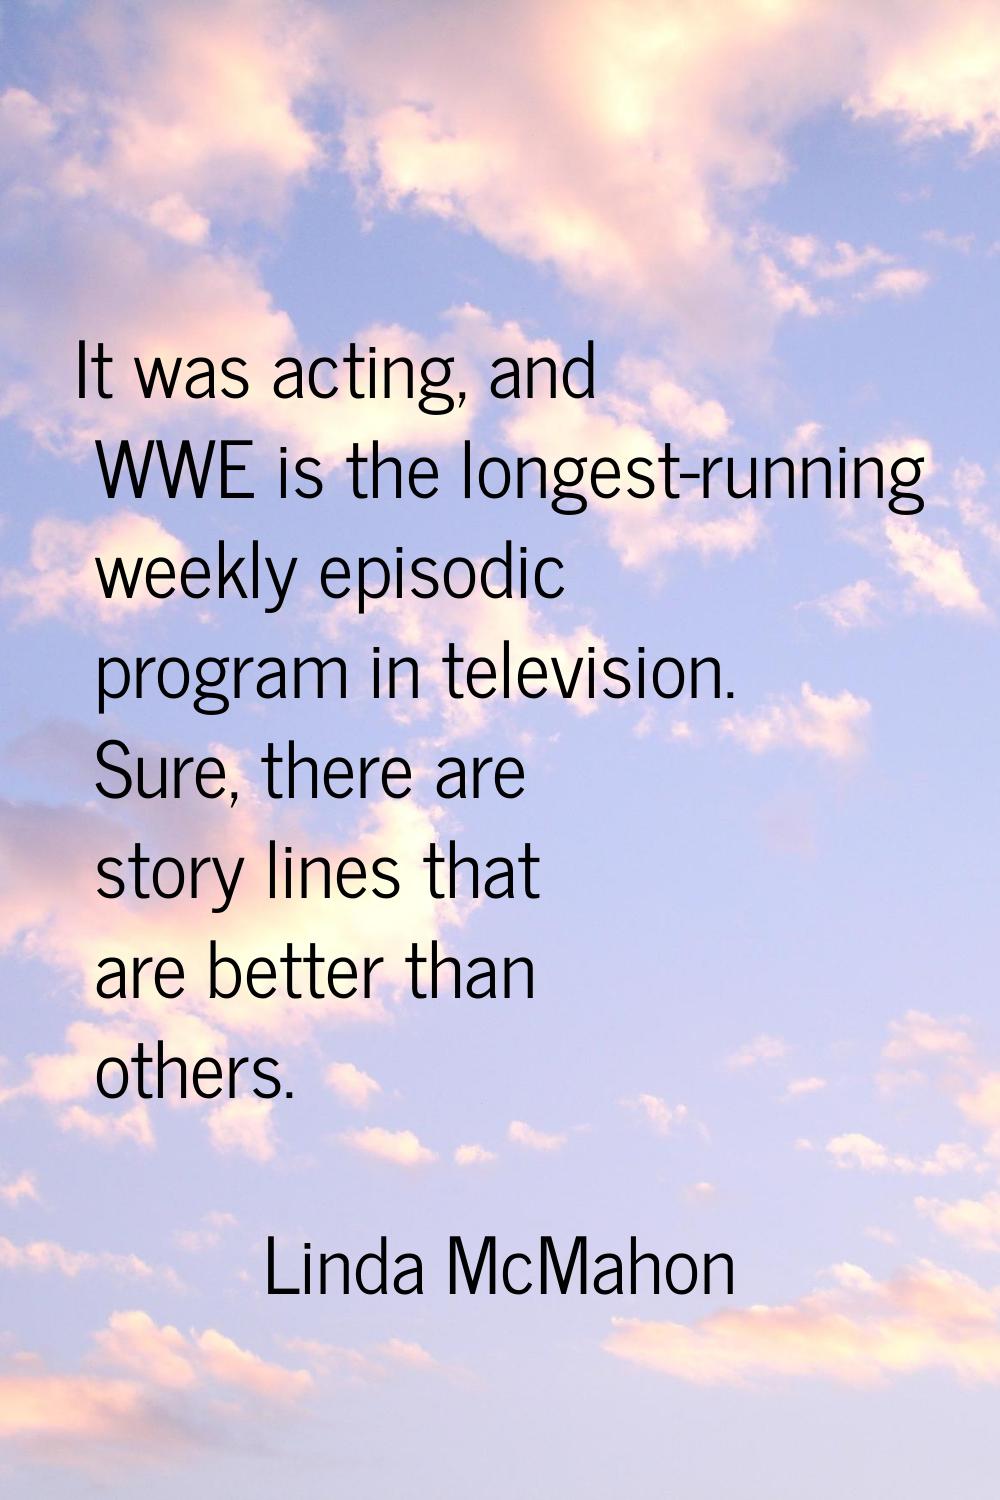 It was acting, and WWE is the longest-running weekly episodic program in television. Sure, there ar